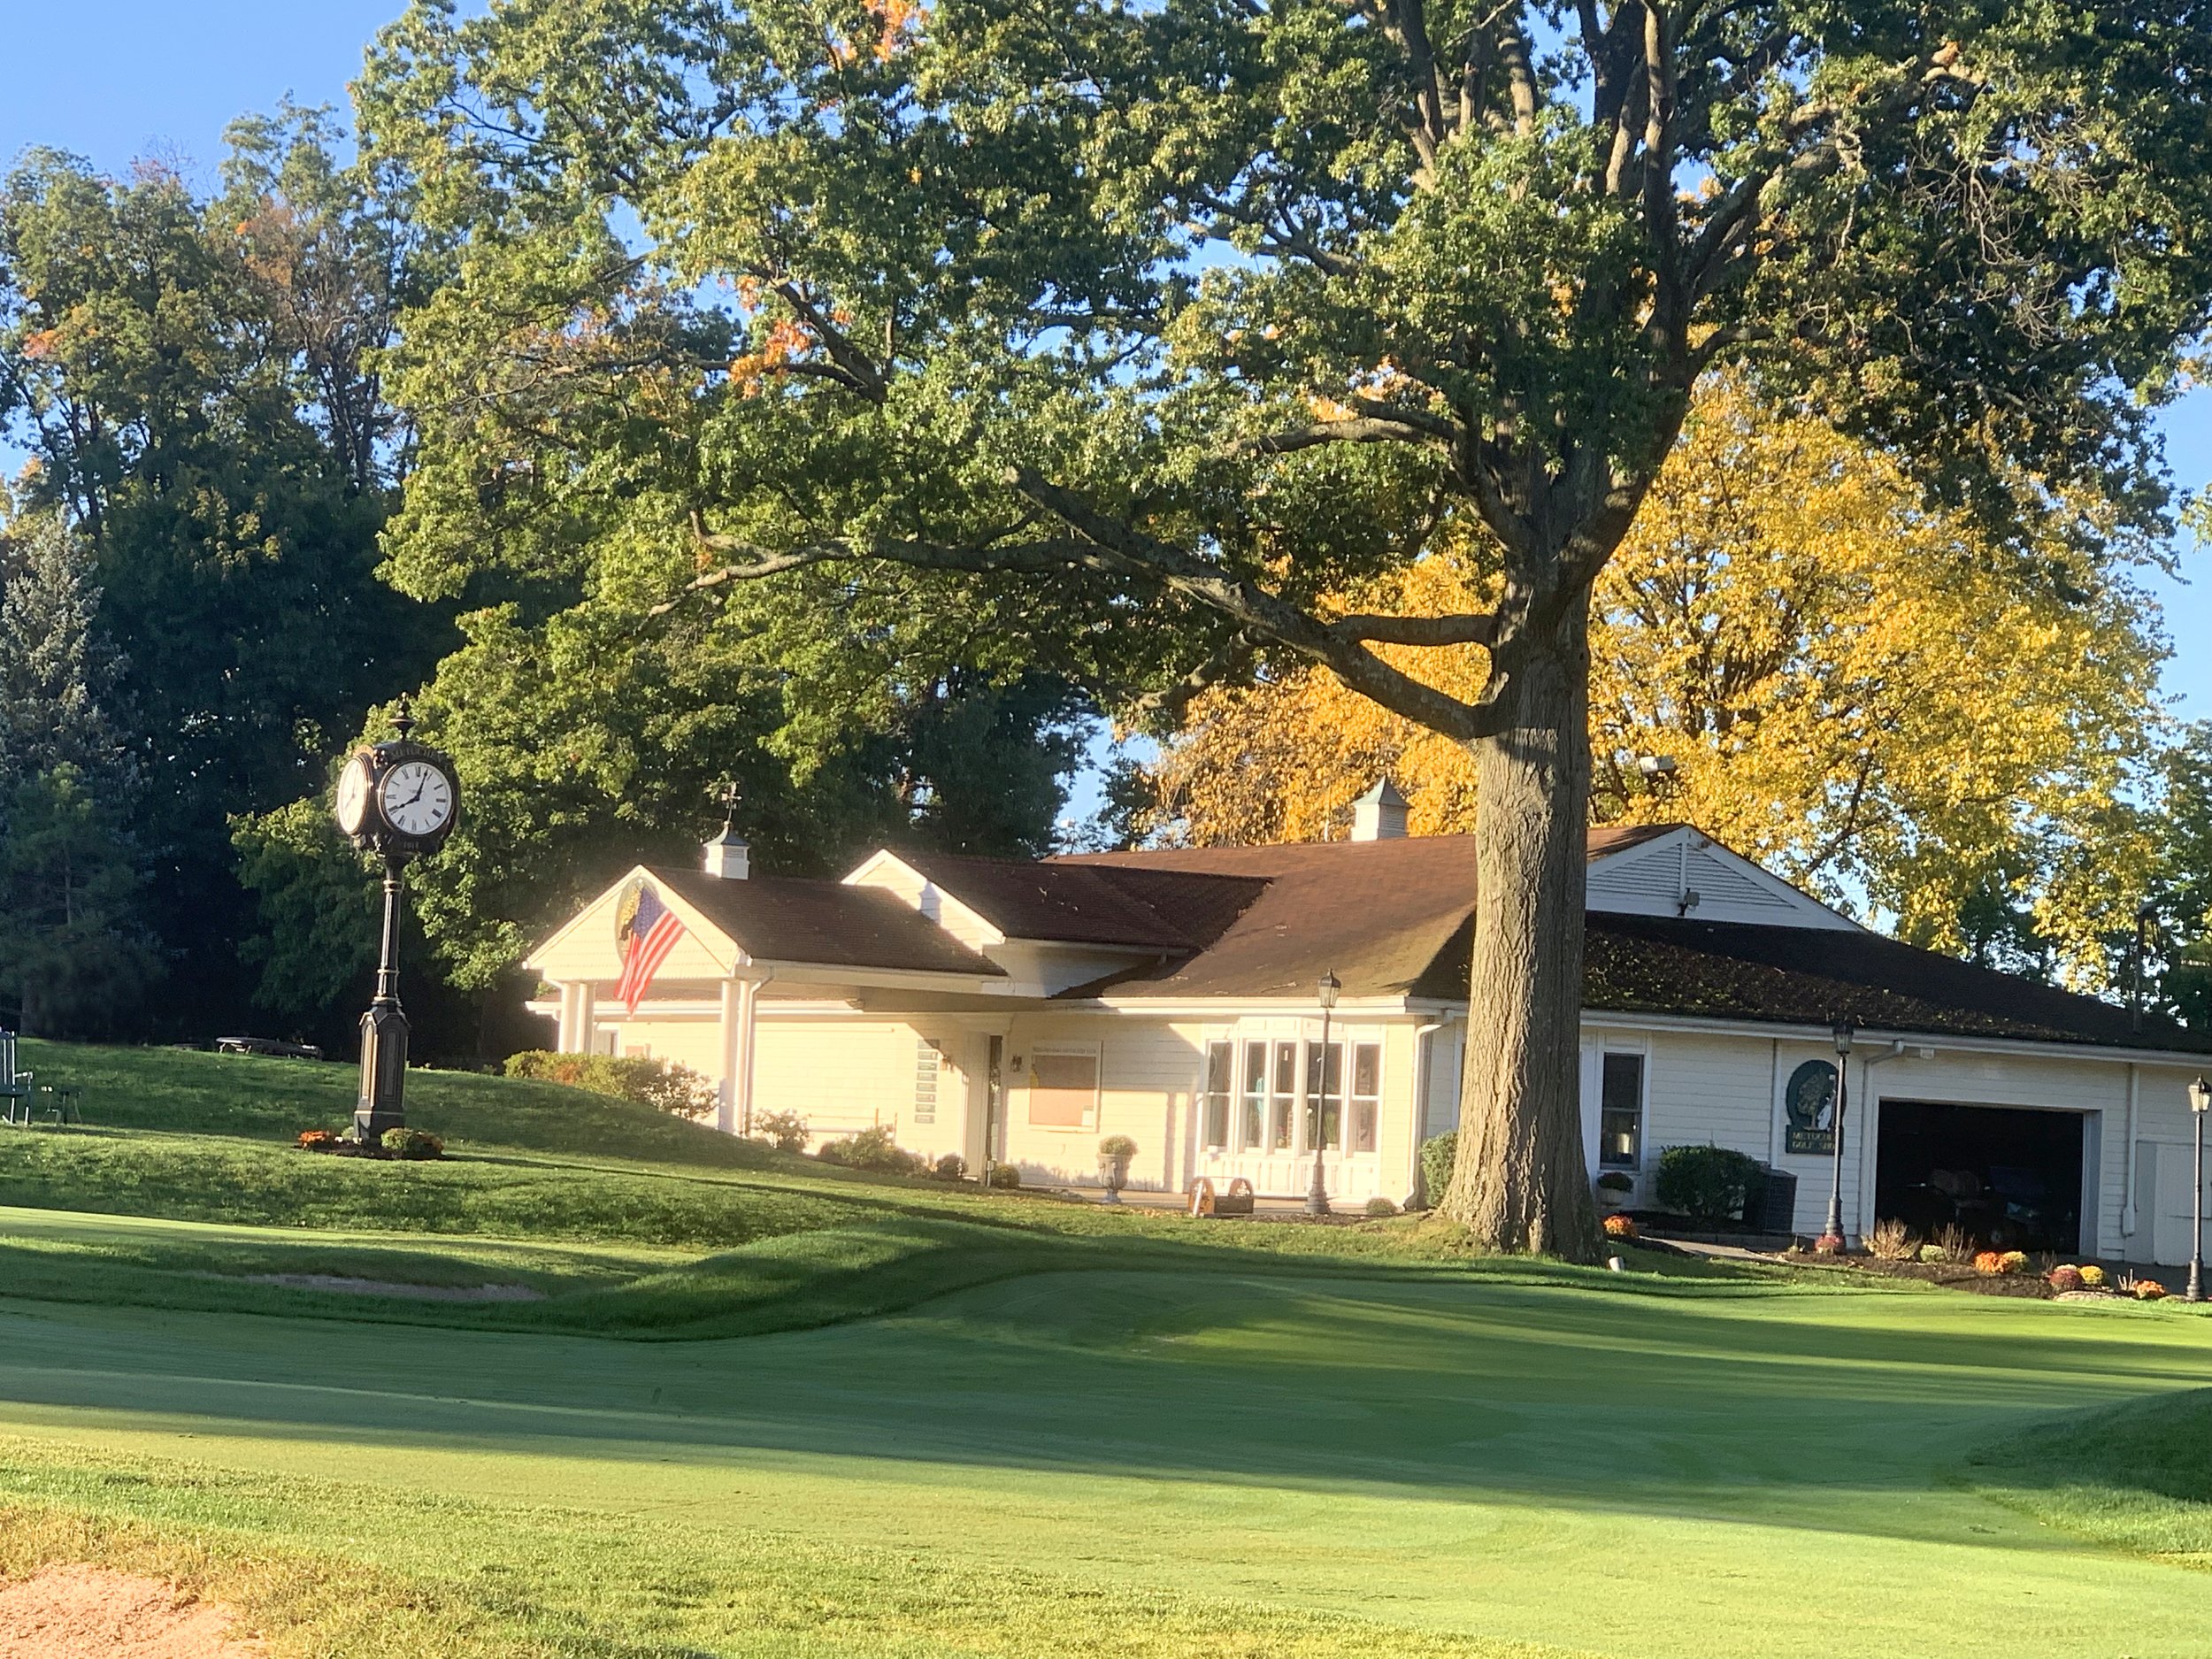 General 1 — Metuchen Golf and Country Club